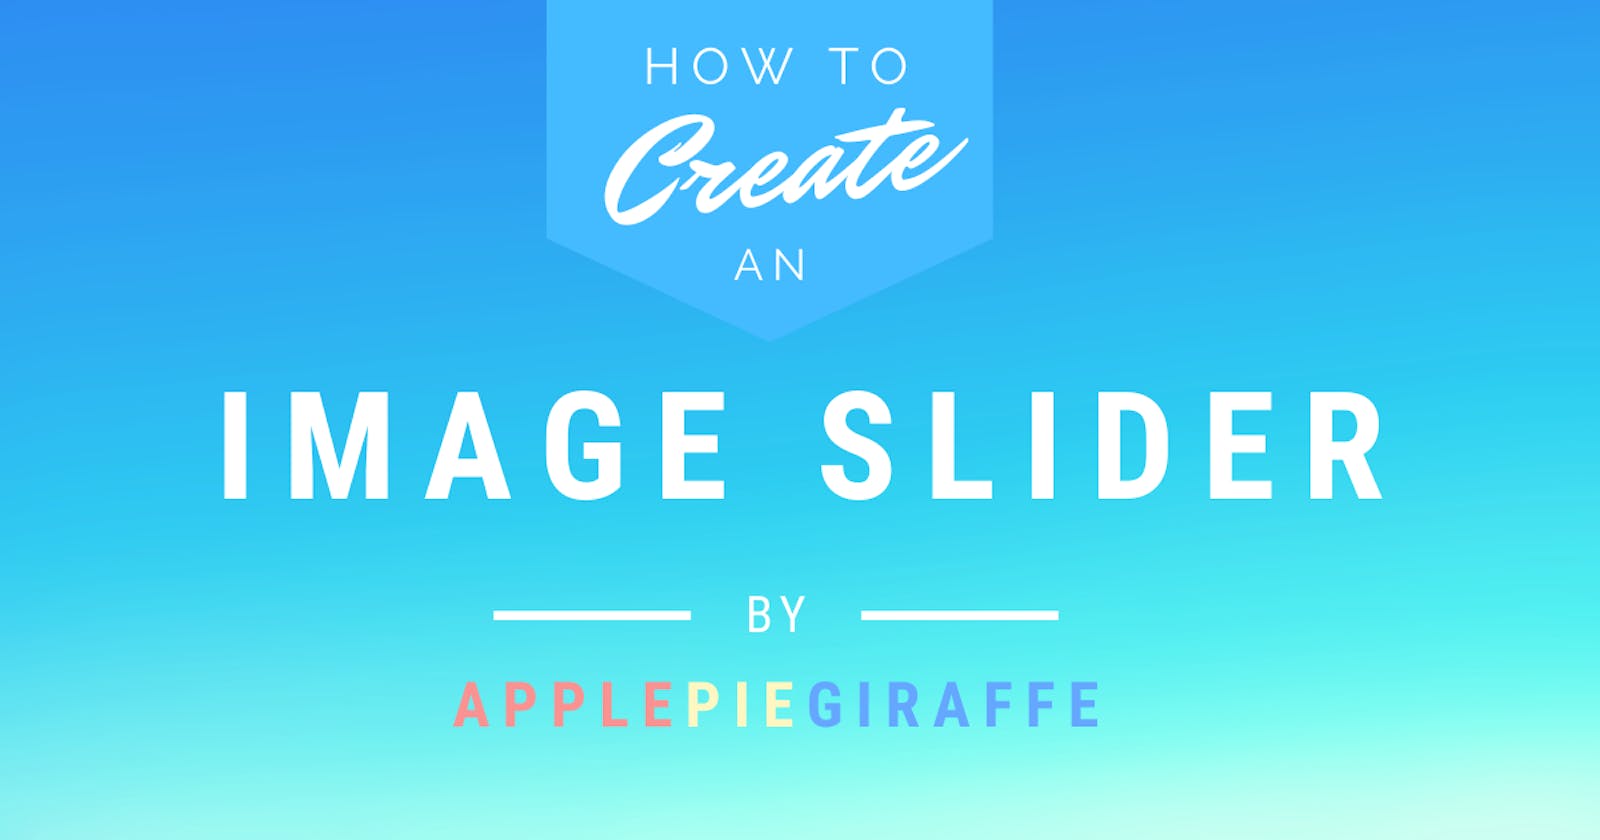 How To Create A Super Simple Image Slider